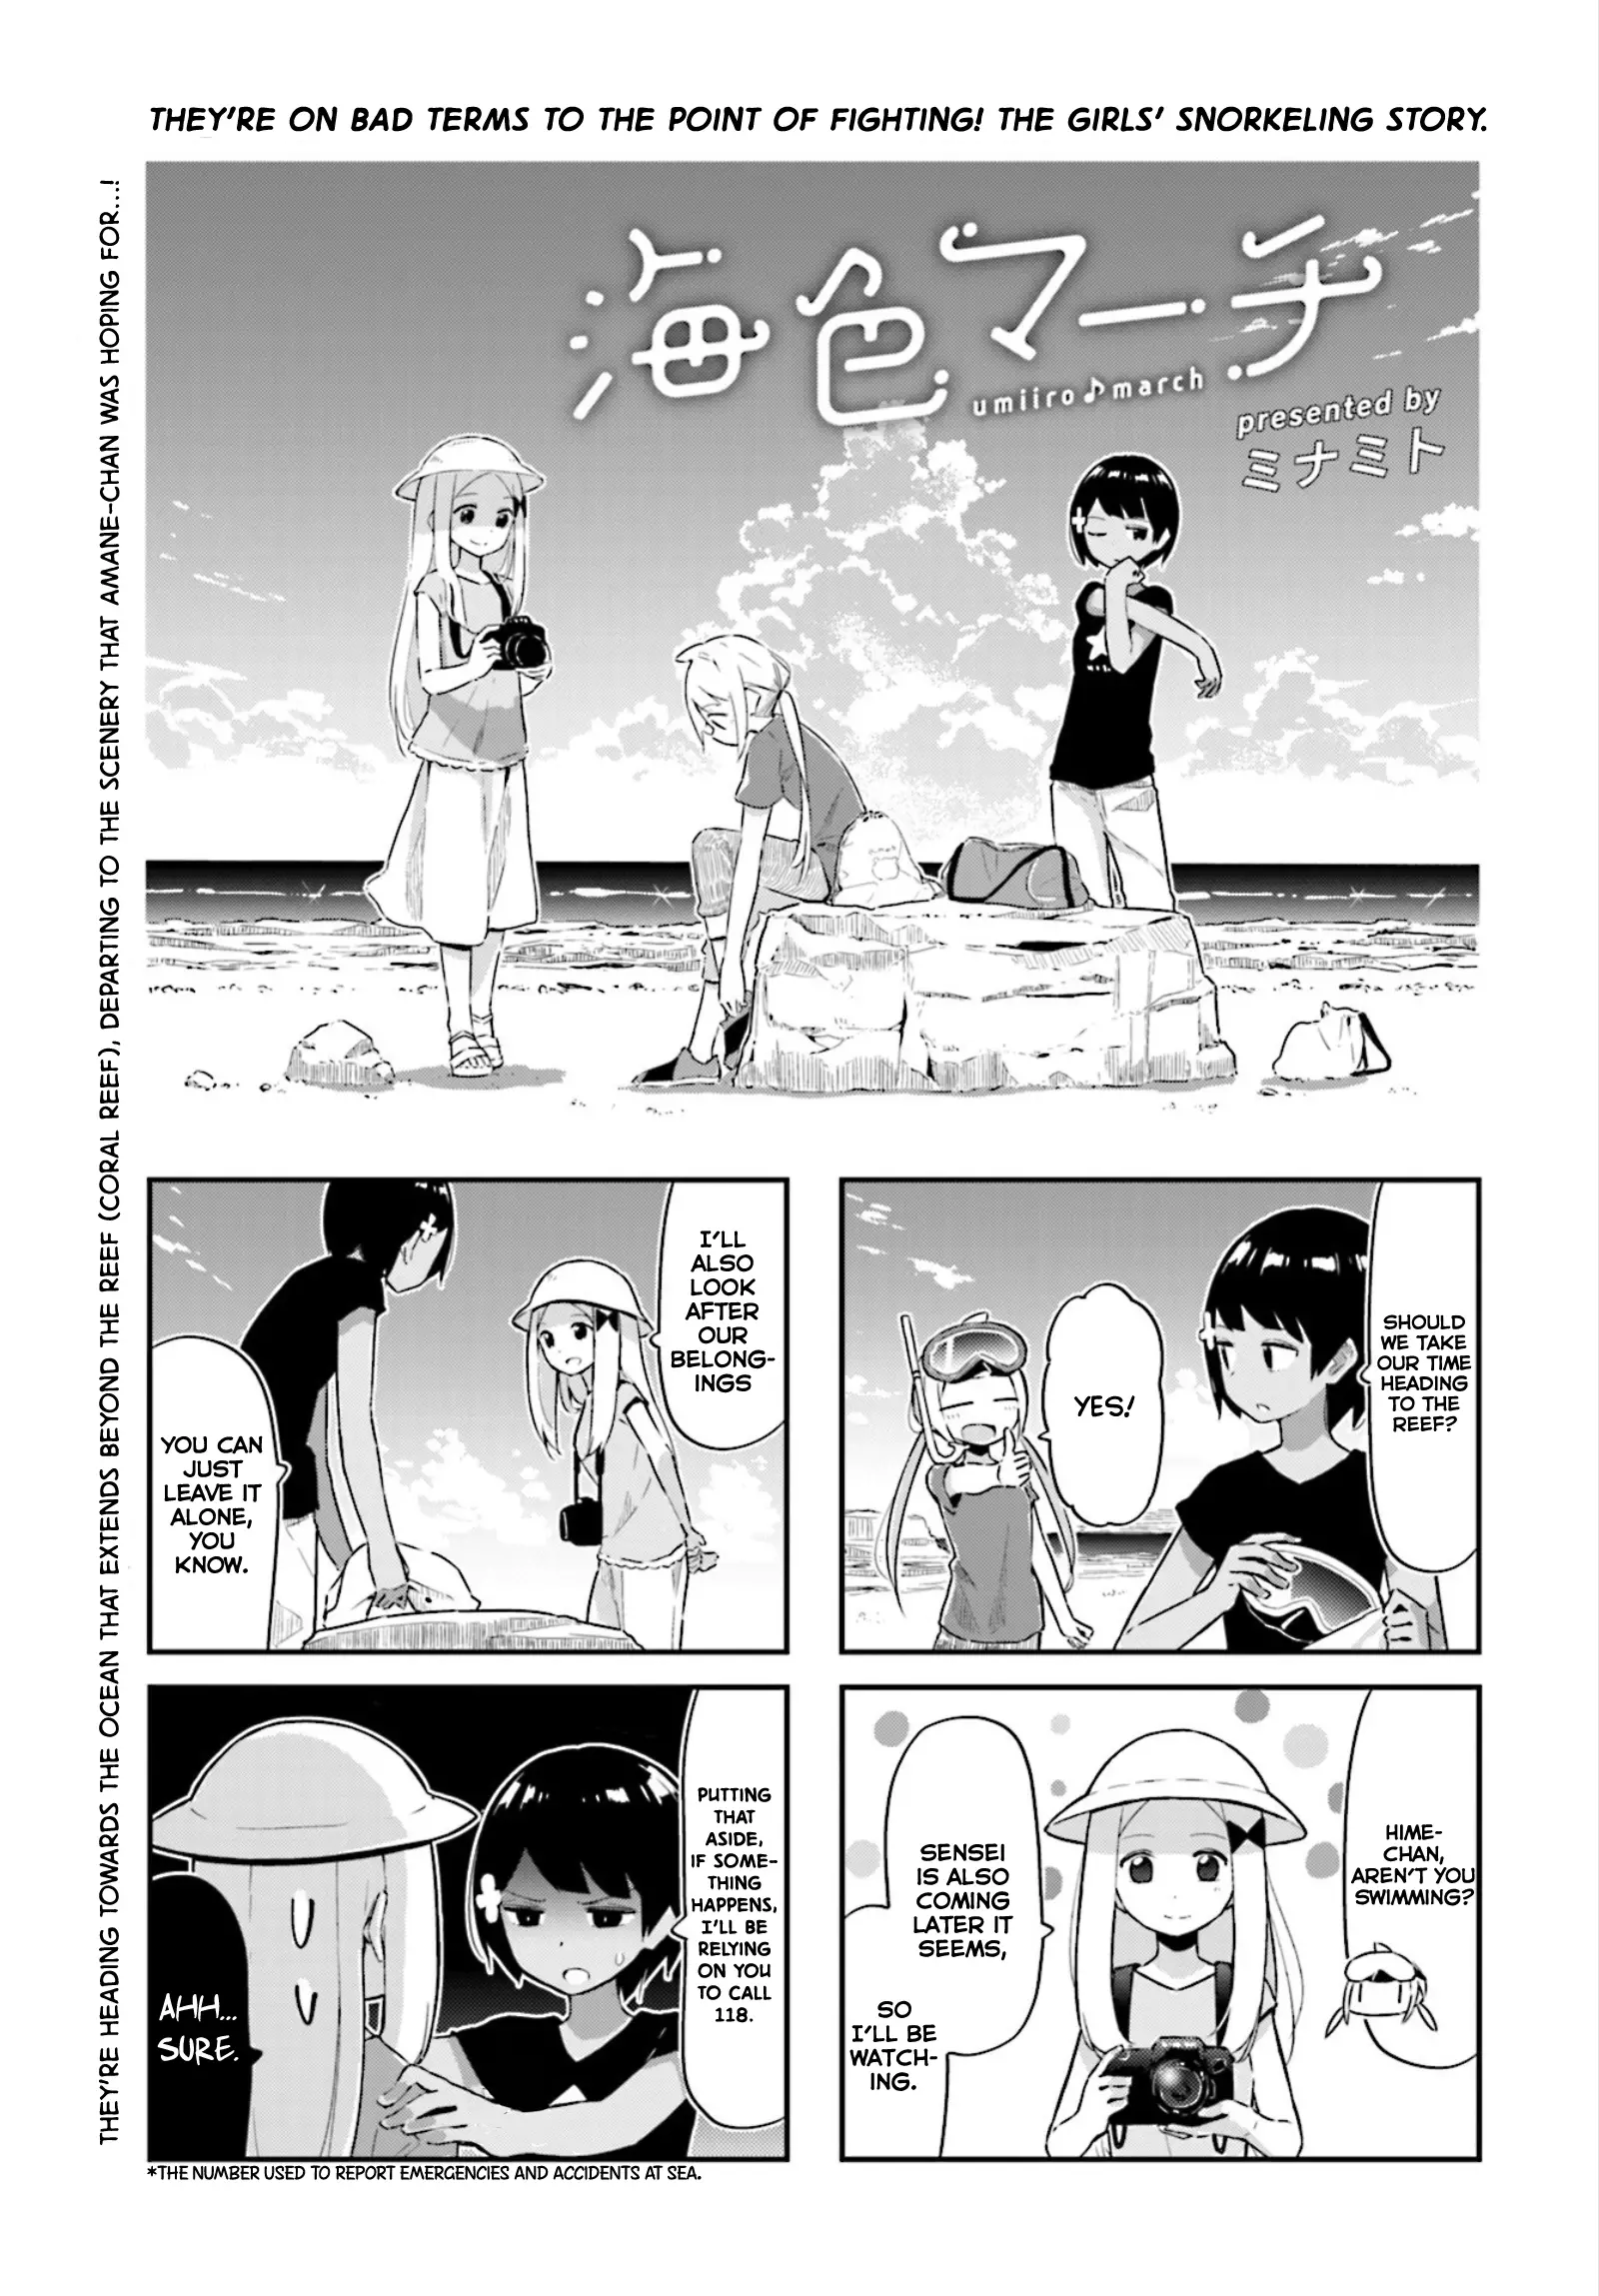 Umiiro March - 13 page 2